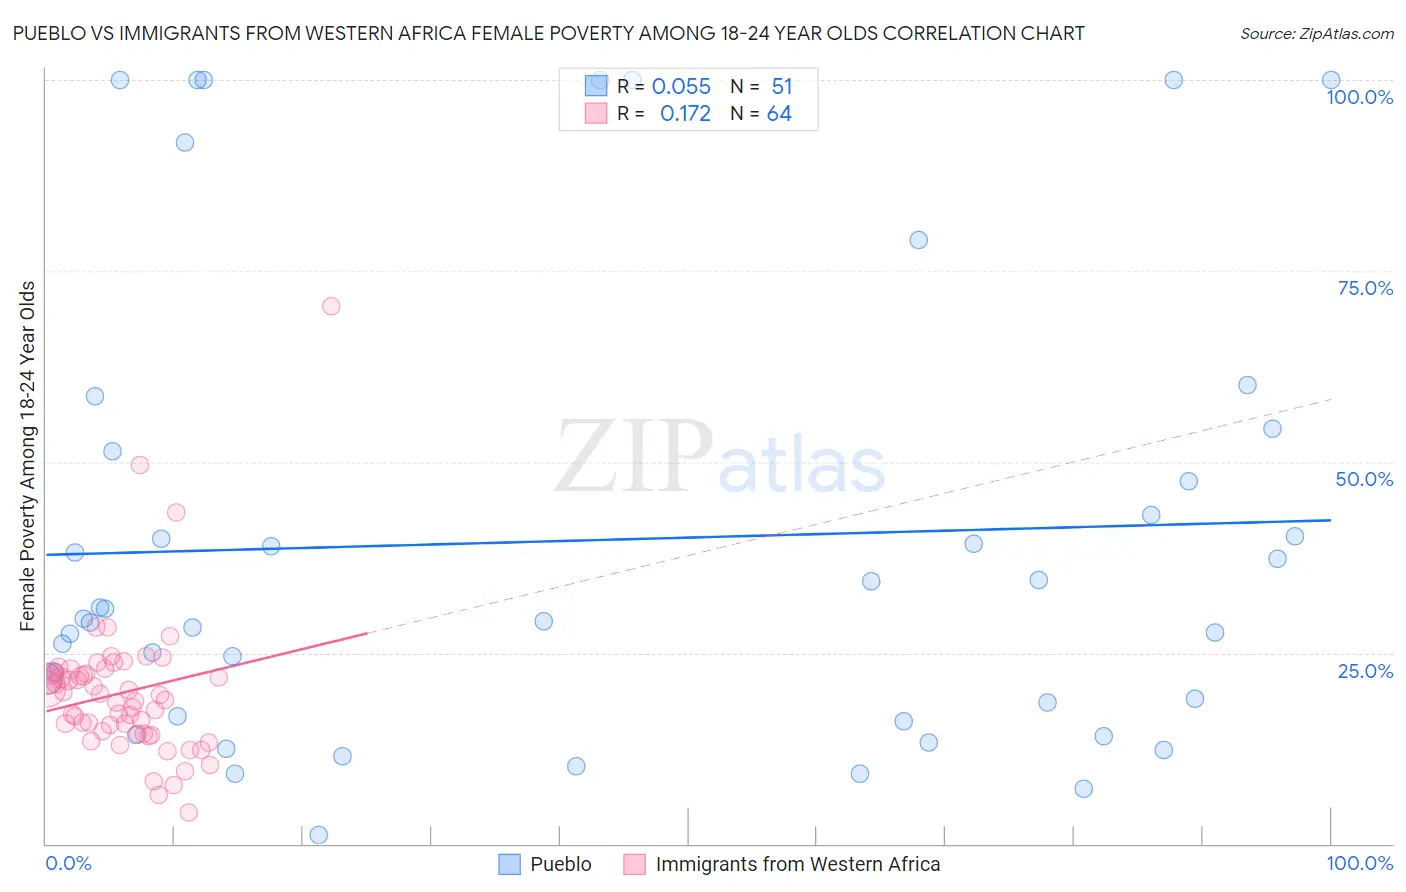 Pueblo vs Immigrants from Western Africa Female Poverty Among 18-24 Year Olds